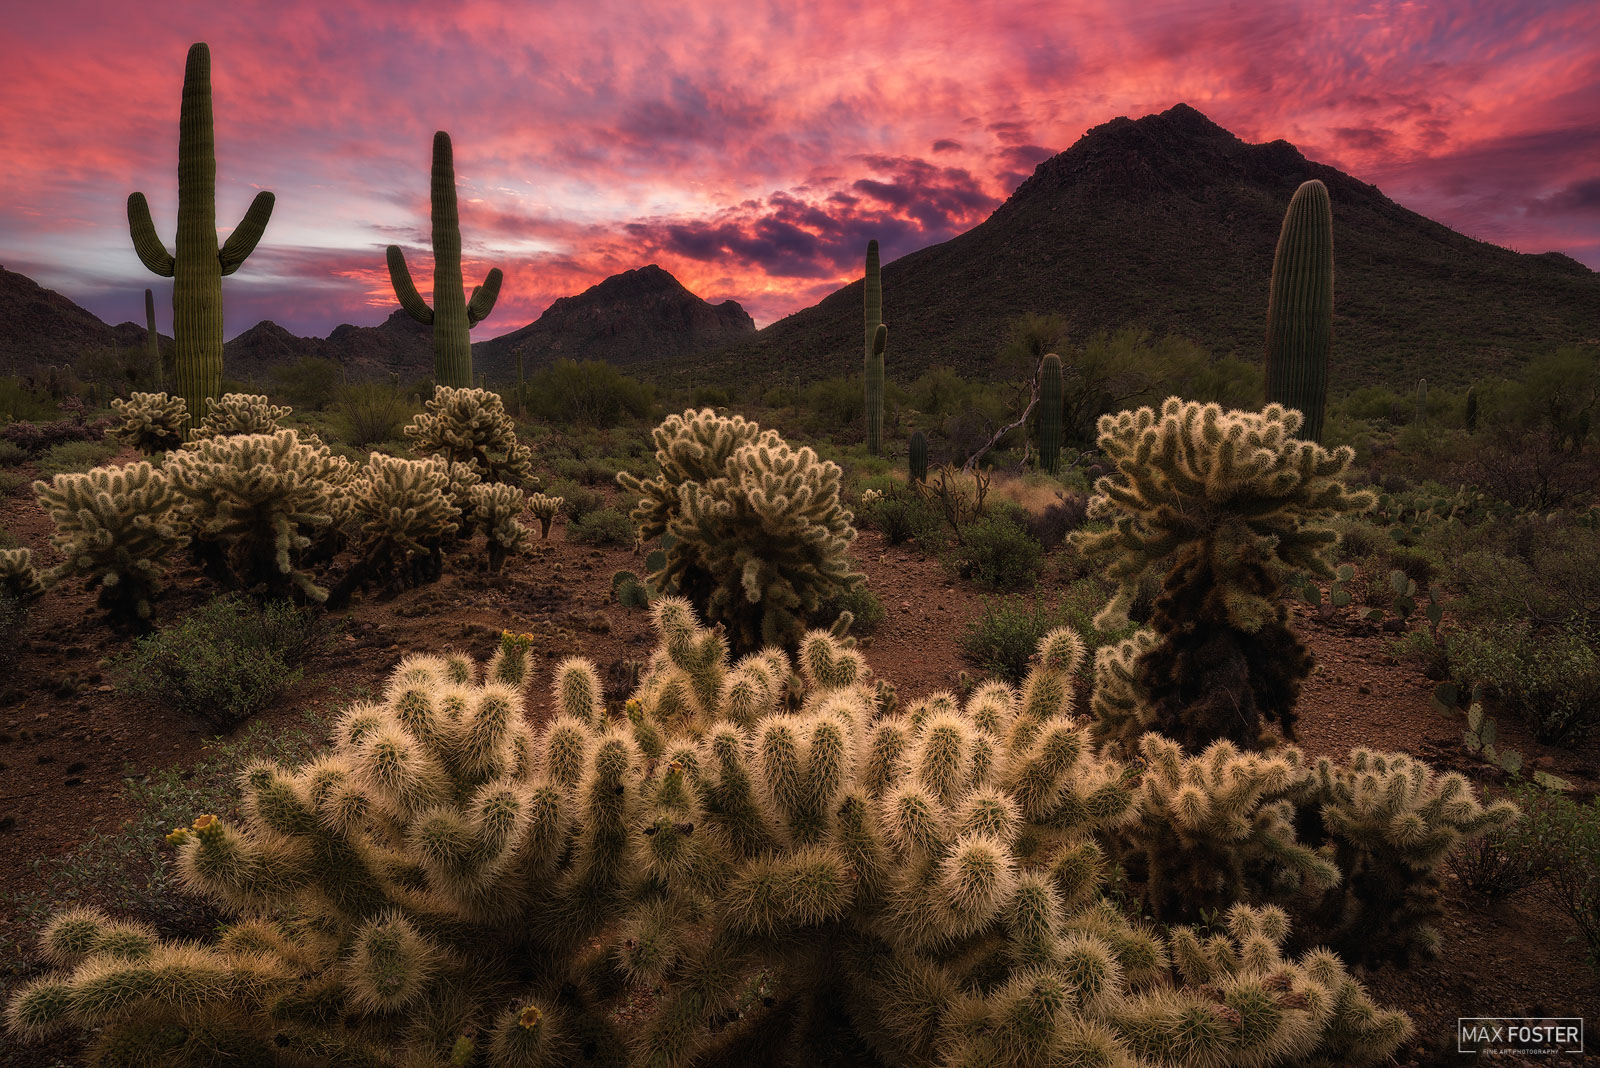 Elevate your space with Skyfire, Max Foster's limited edition photography print of the Tucson Mountain Park in Arizona from his...